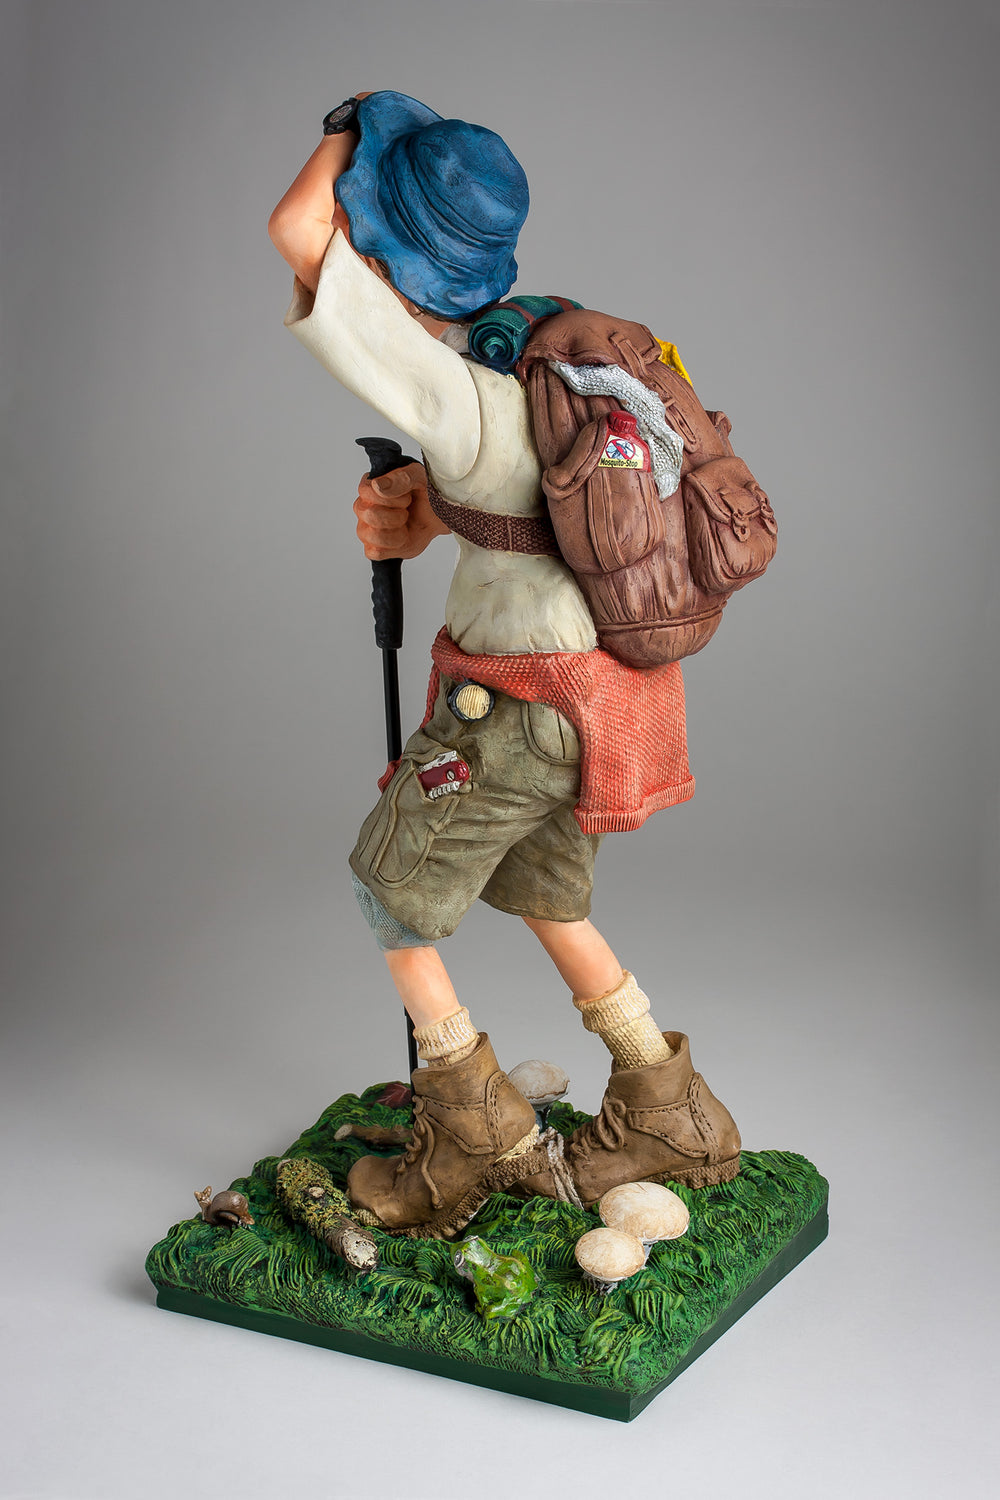 Guillermo Forchino - Comic Art Figurine - "The Hiker" - Buchan's Kerrisdale Stationery